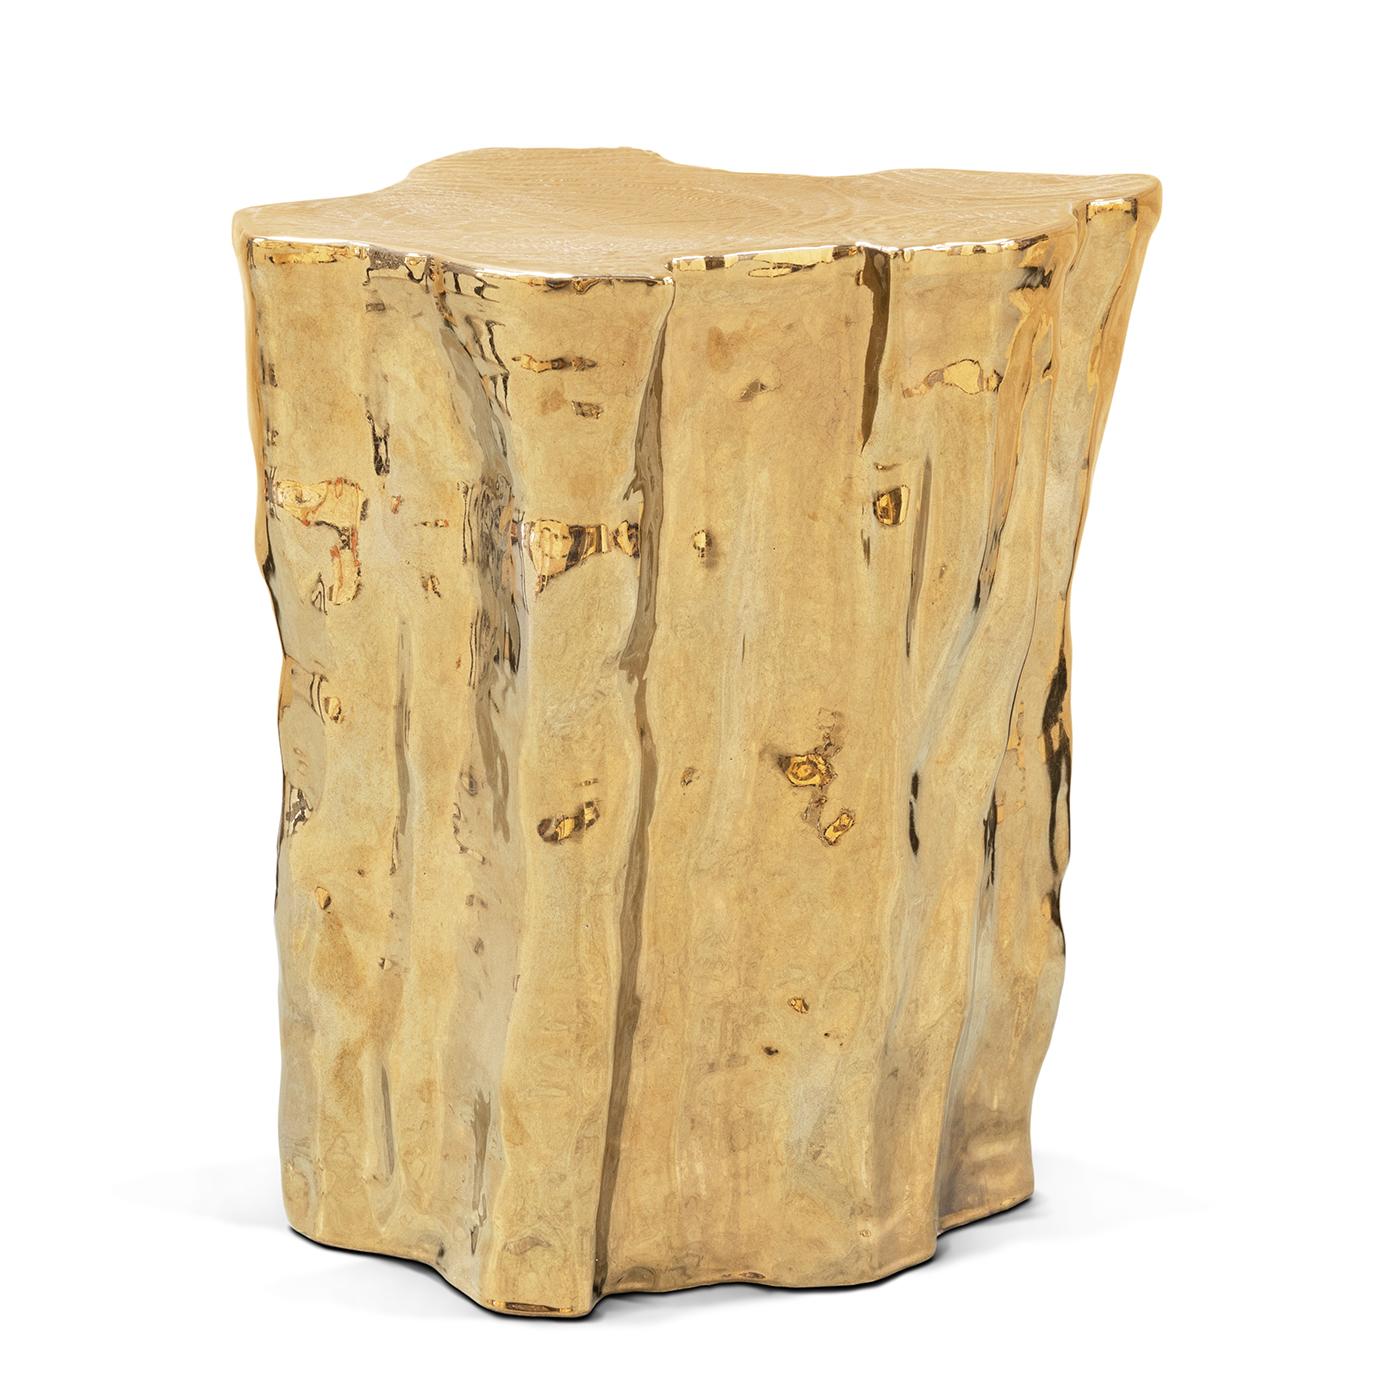 Side table heaven gold low ceramic made 
in handcrafted black ceramic.
Also available in black ceramic, on request.